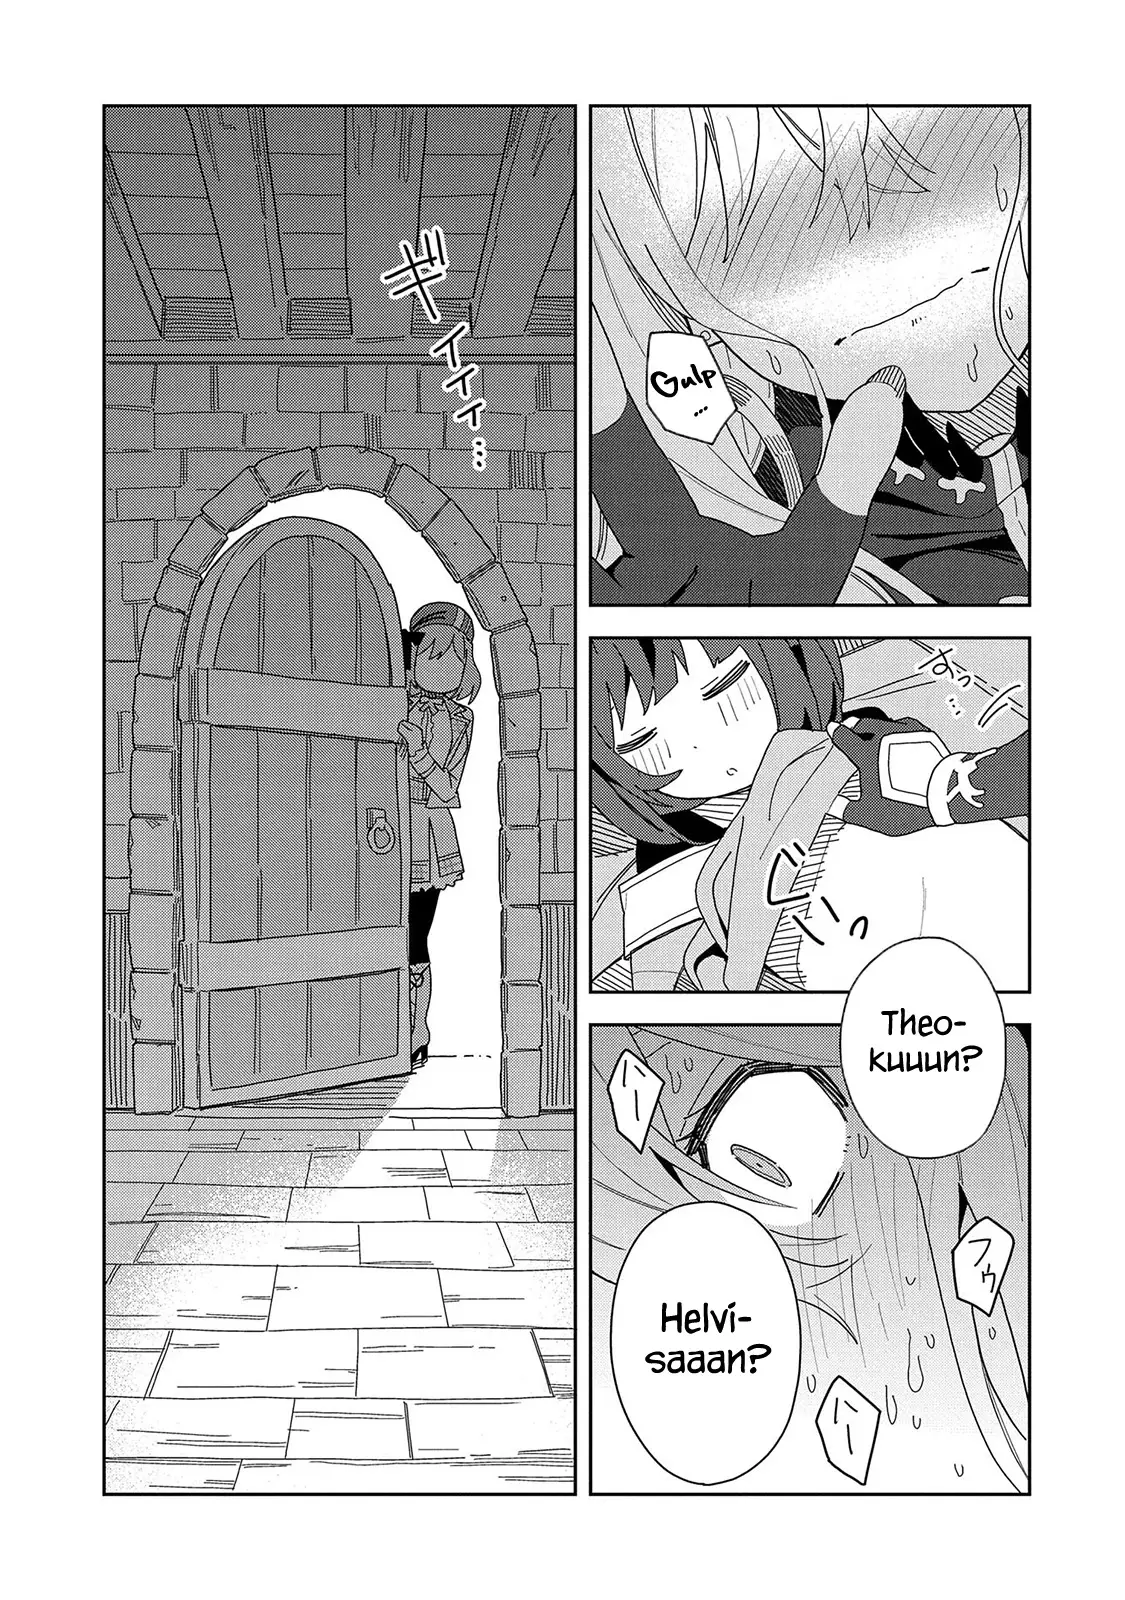 I Summoned The Devil To Grant Me A Wish, But I Married Her Instead Since She Was Adorable ~My New Devil Wife~ - 6 page 13